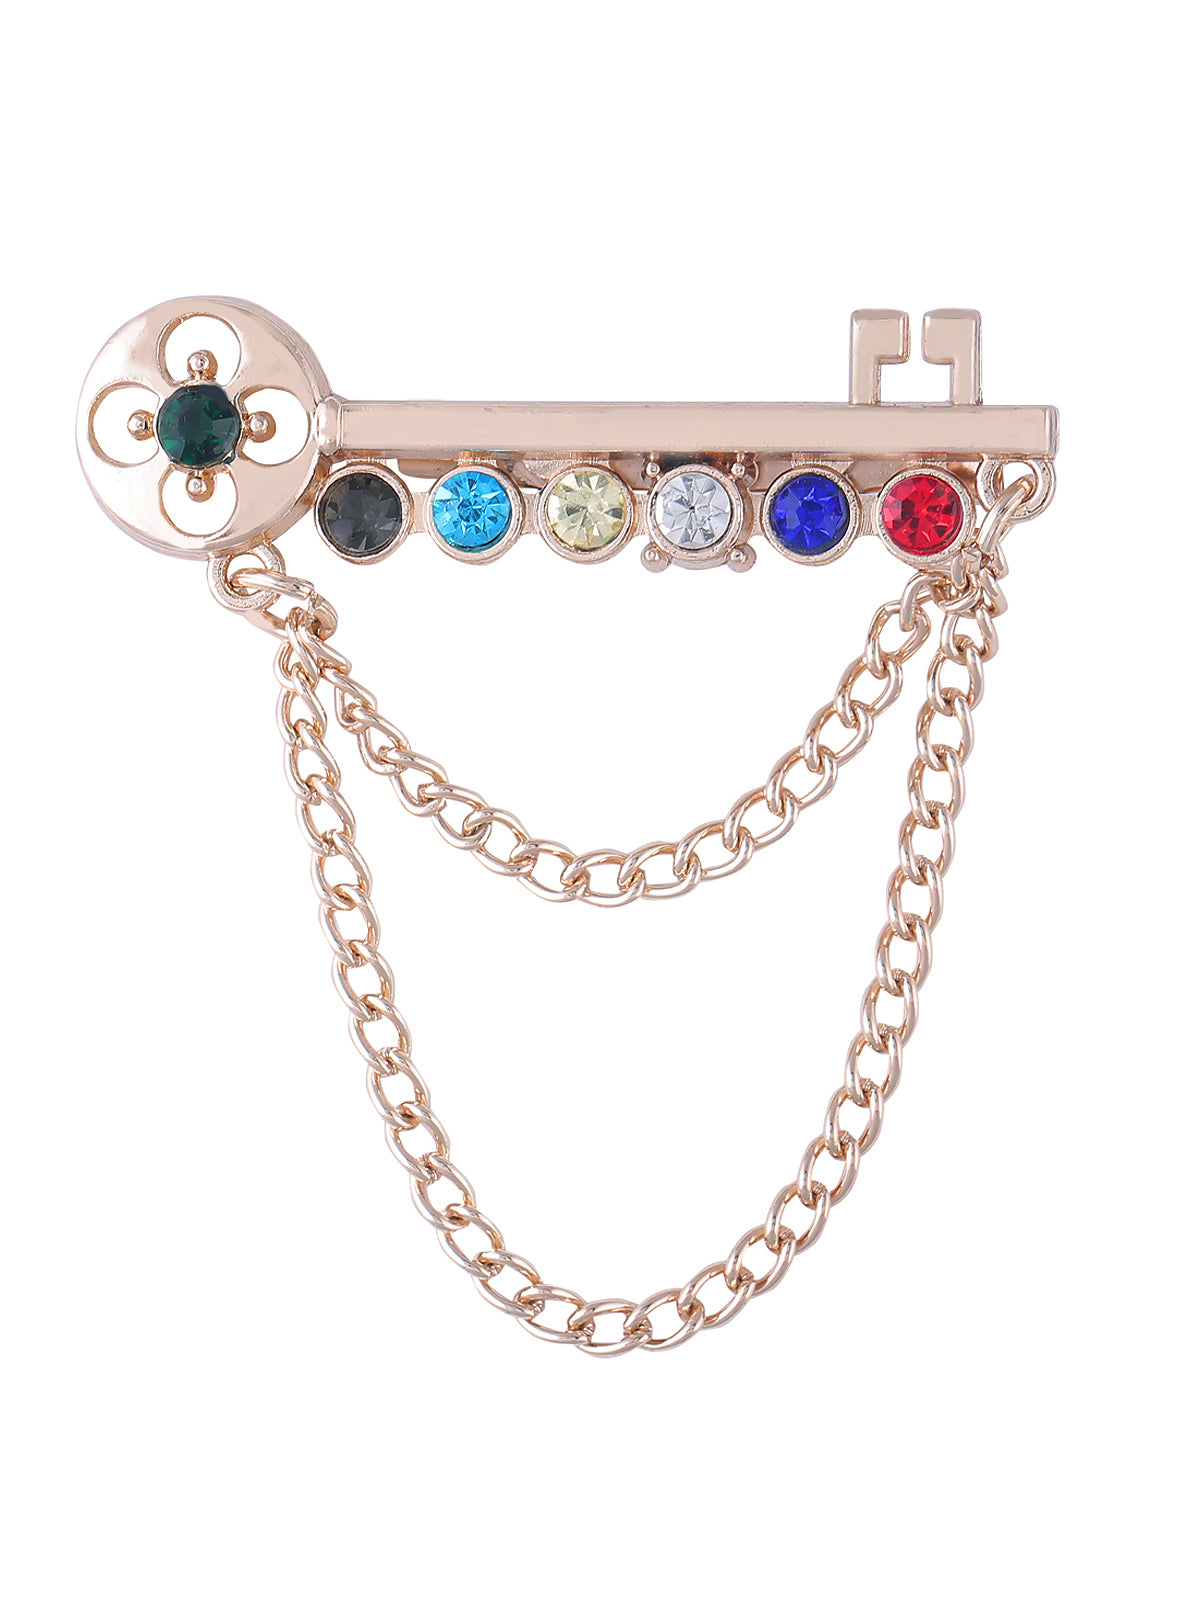 Key Shaped Multicoloured Brooch with Chain Hanging in Golden Color